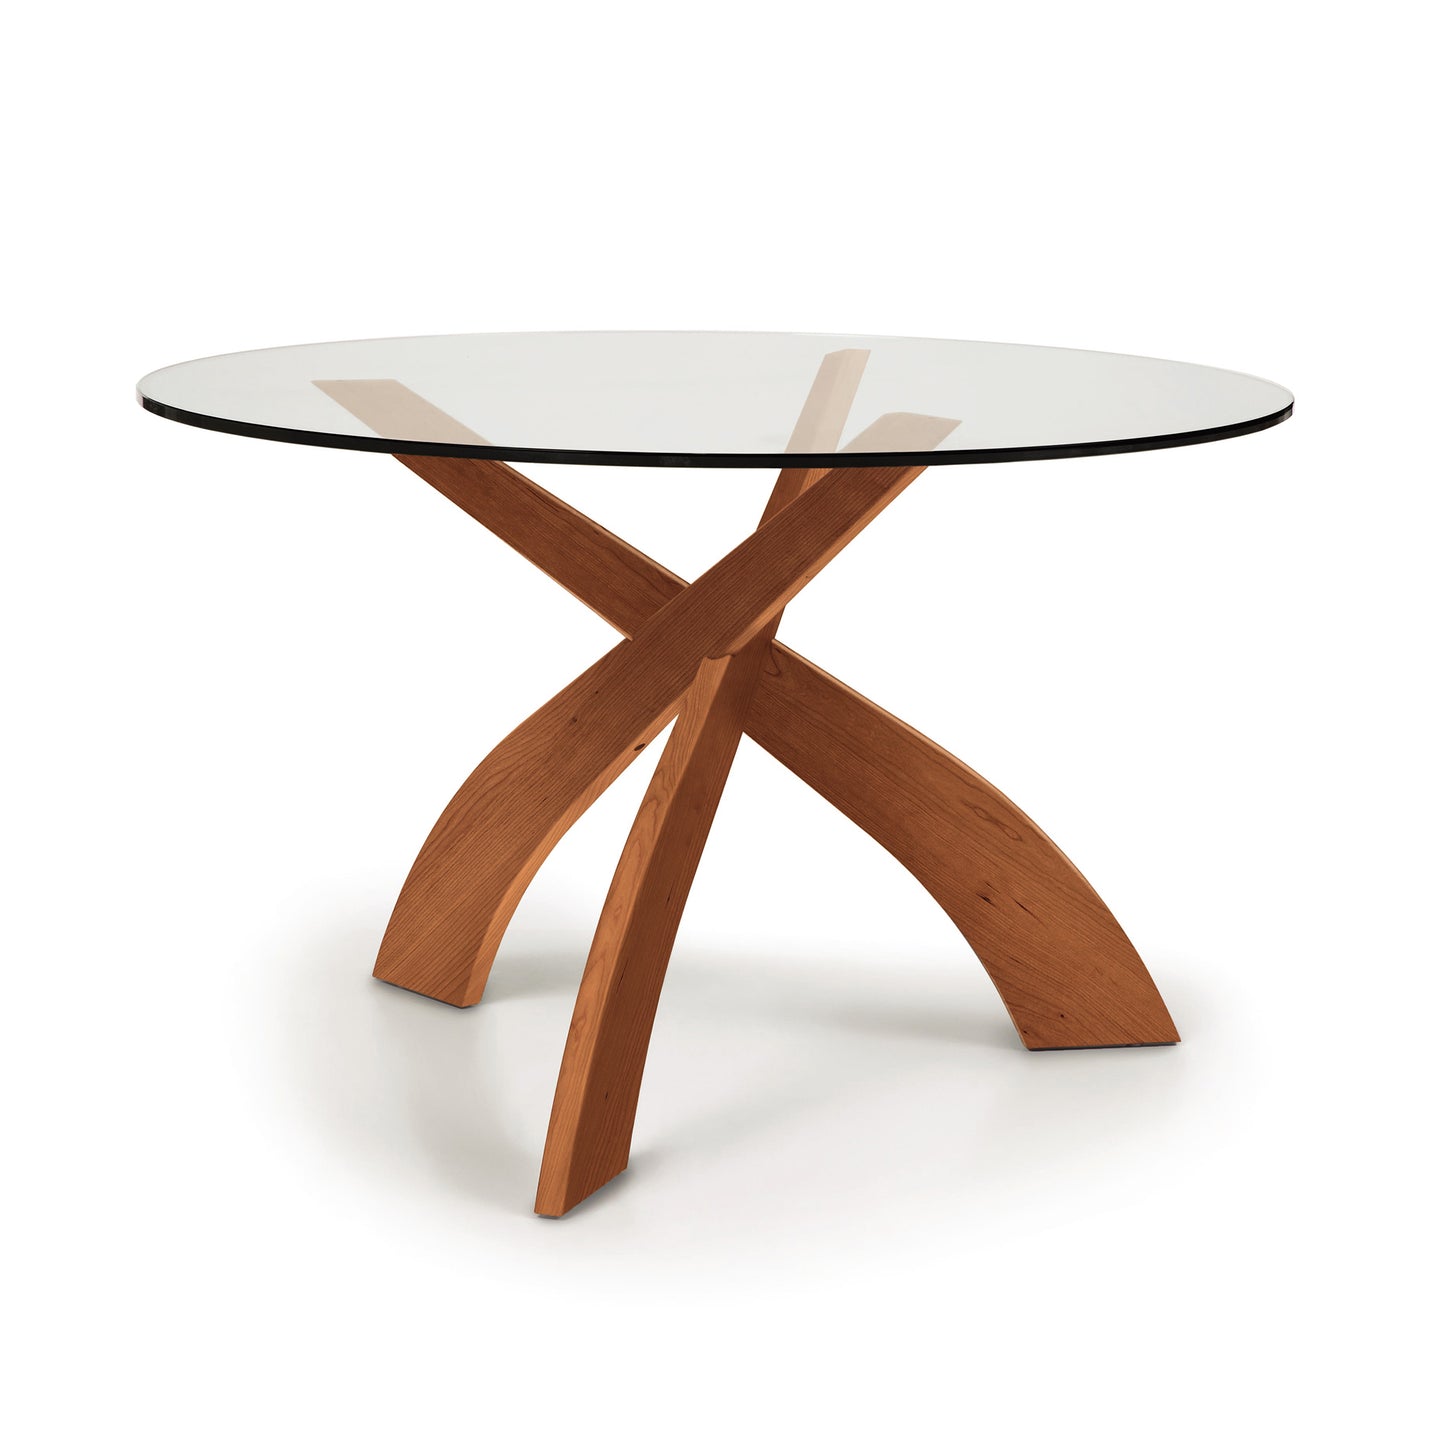 A round tempered glass-top Entwine dining table with a cherry wood, x-shaped base by Copeland Furniture on a white background.